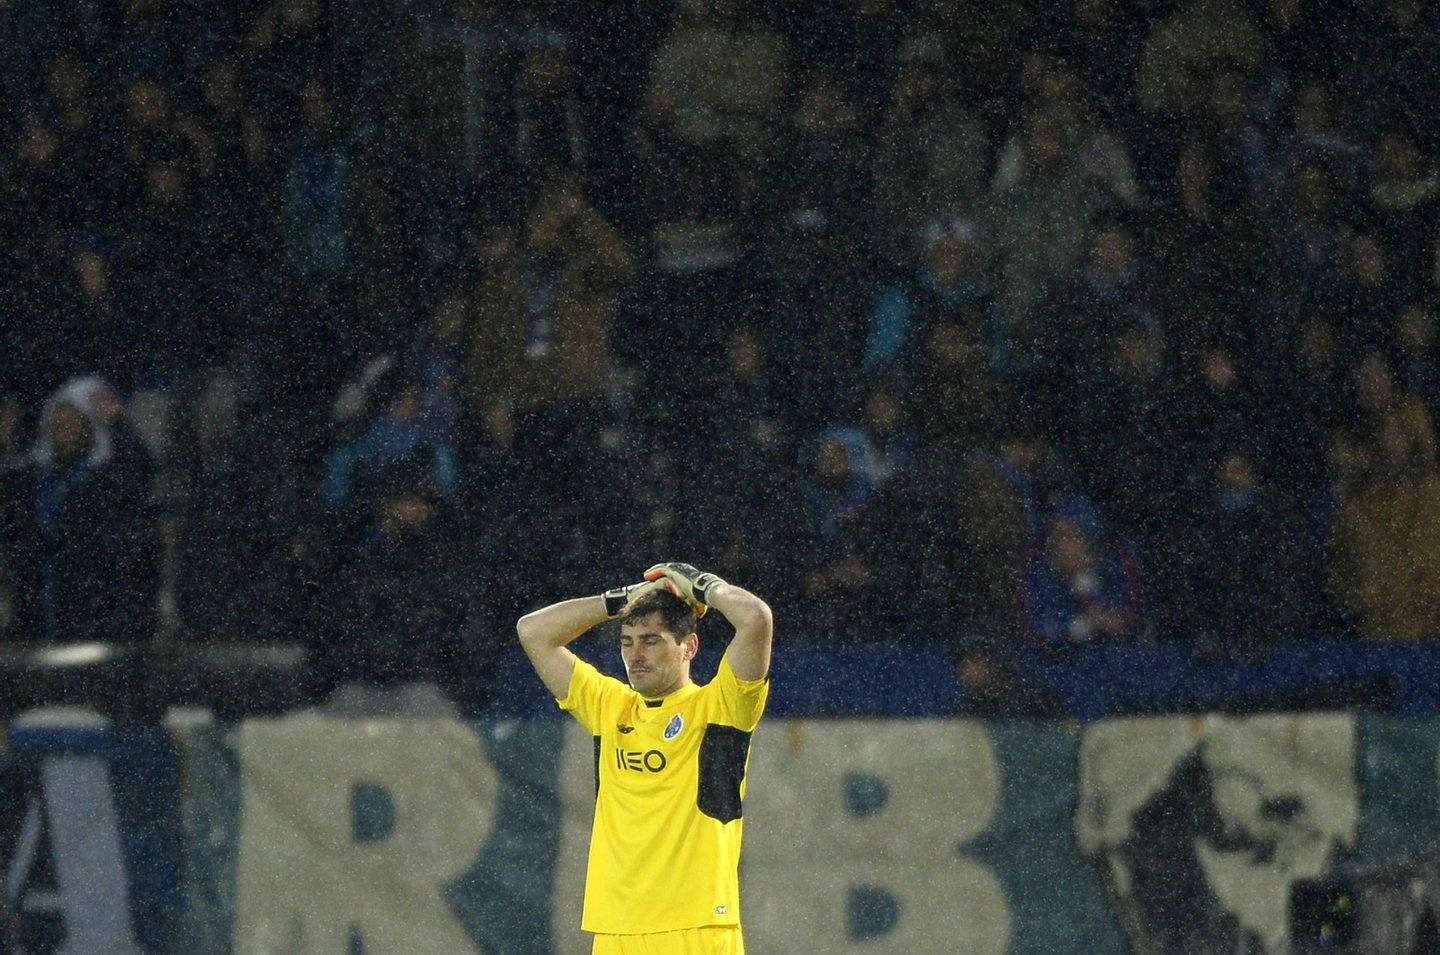 Porto's Spanish goalkeeper Iker Casillas gestures at the end of the Portuguese league football match Vitoria Guimaraes SC vs FC Porto at the Dom Alfonso Henriques stadium in Guimaraes on January 17, 2016. Vitoria won the match 1-0. AFP PHOTO/ MIGUEL RIOPA / AFP / MIGUEL RIOPA (Photo credit should read MIGUEL RIOPA/AFP/Getty Images)